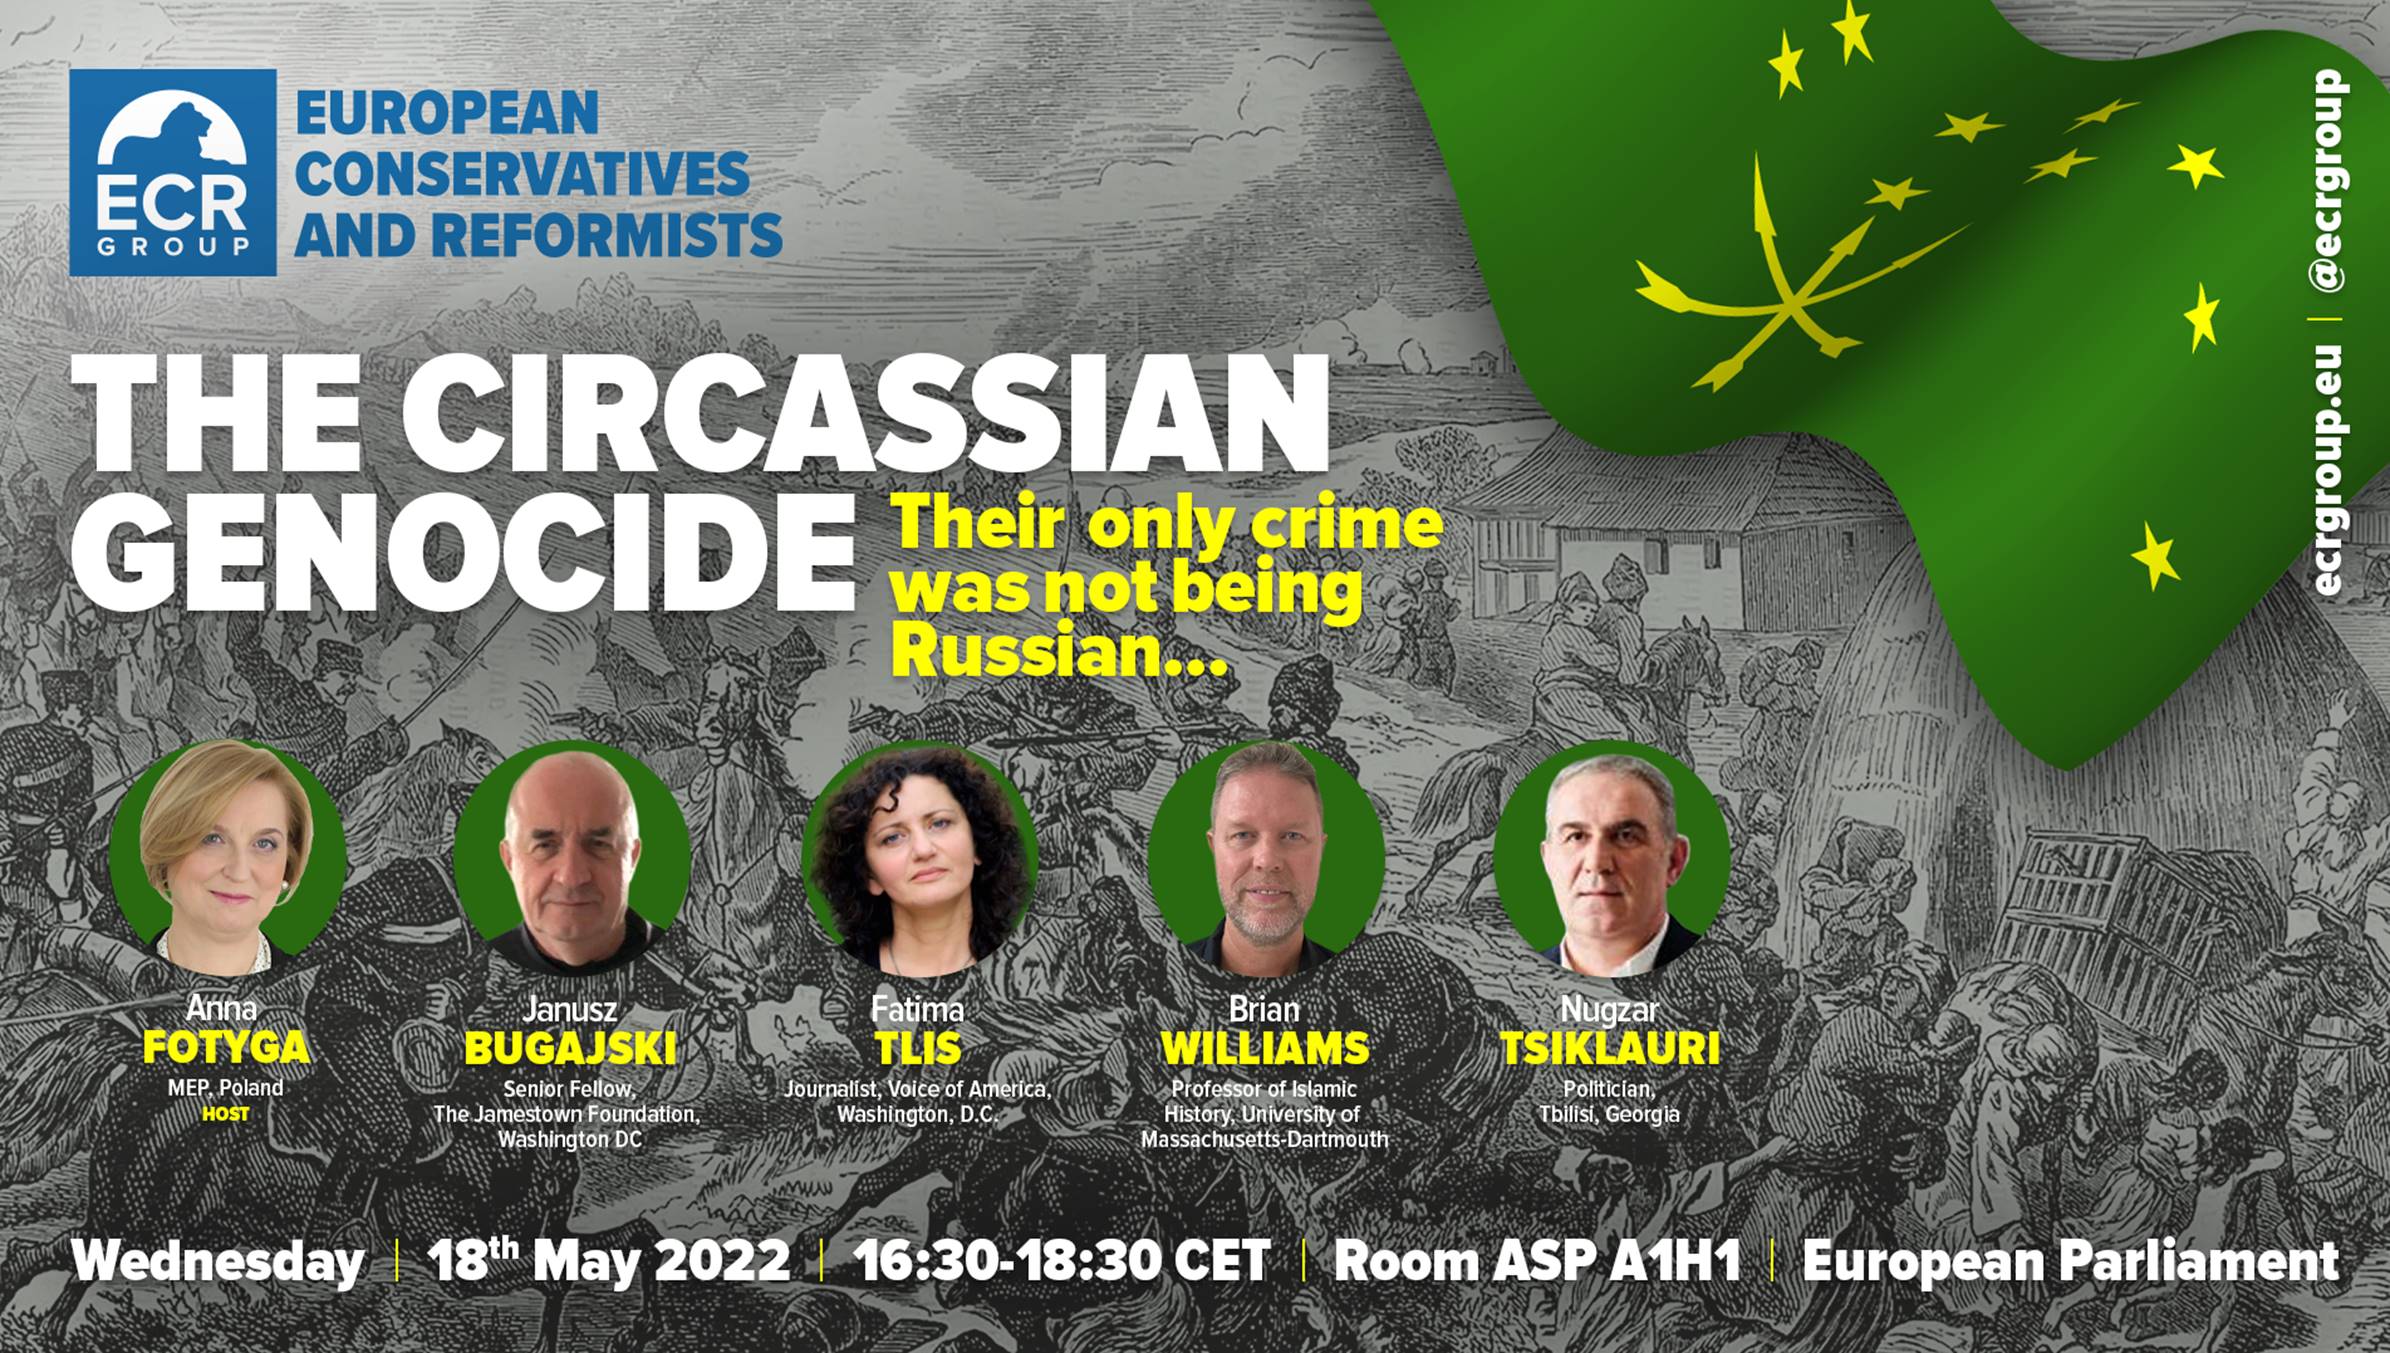 Their Only Crime Was Not Being Russians. The Circassian Genocide, Wednesday, 18th May 2022